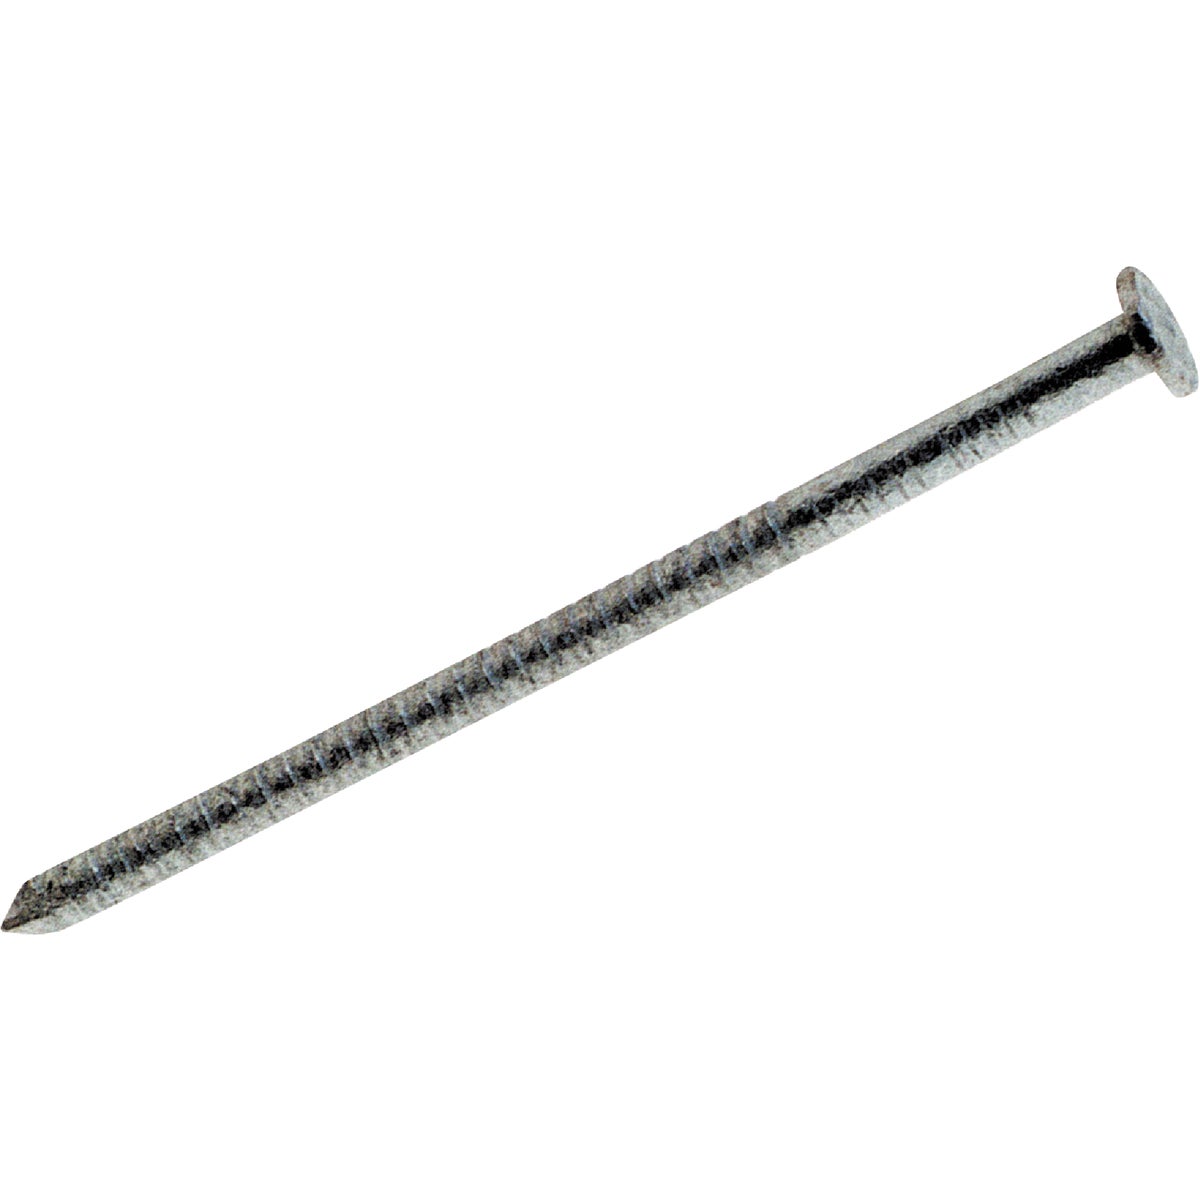 Item 765855, Ring shank deck nail for exterior use.